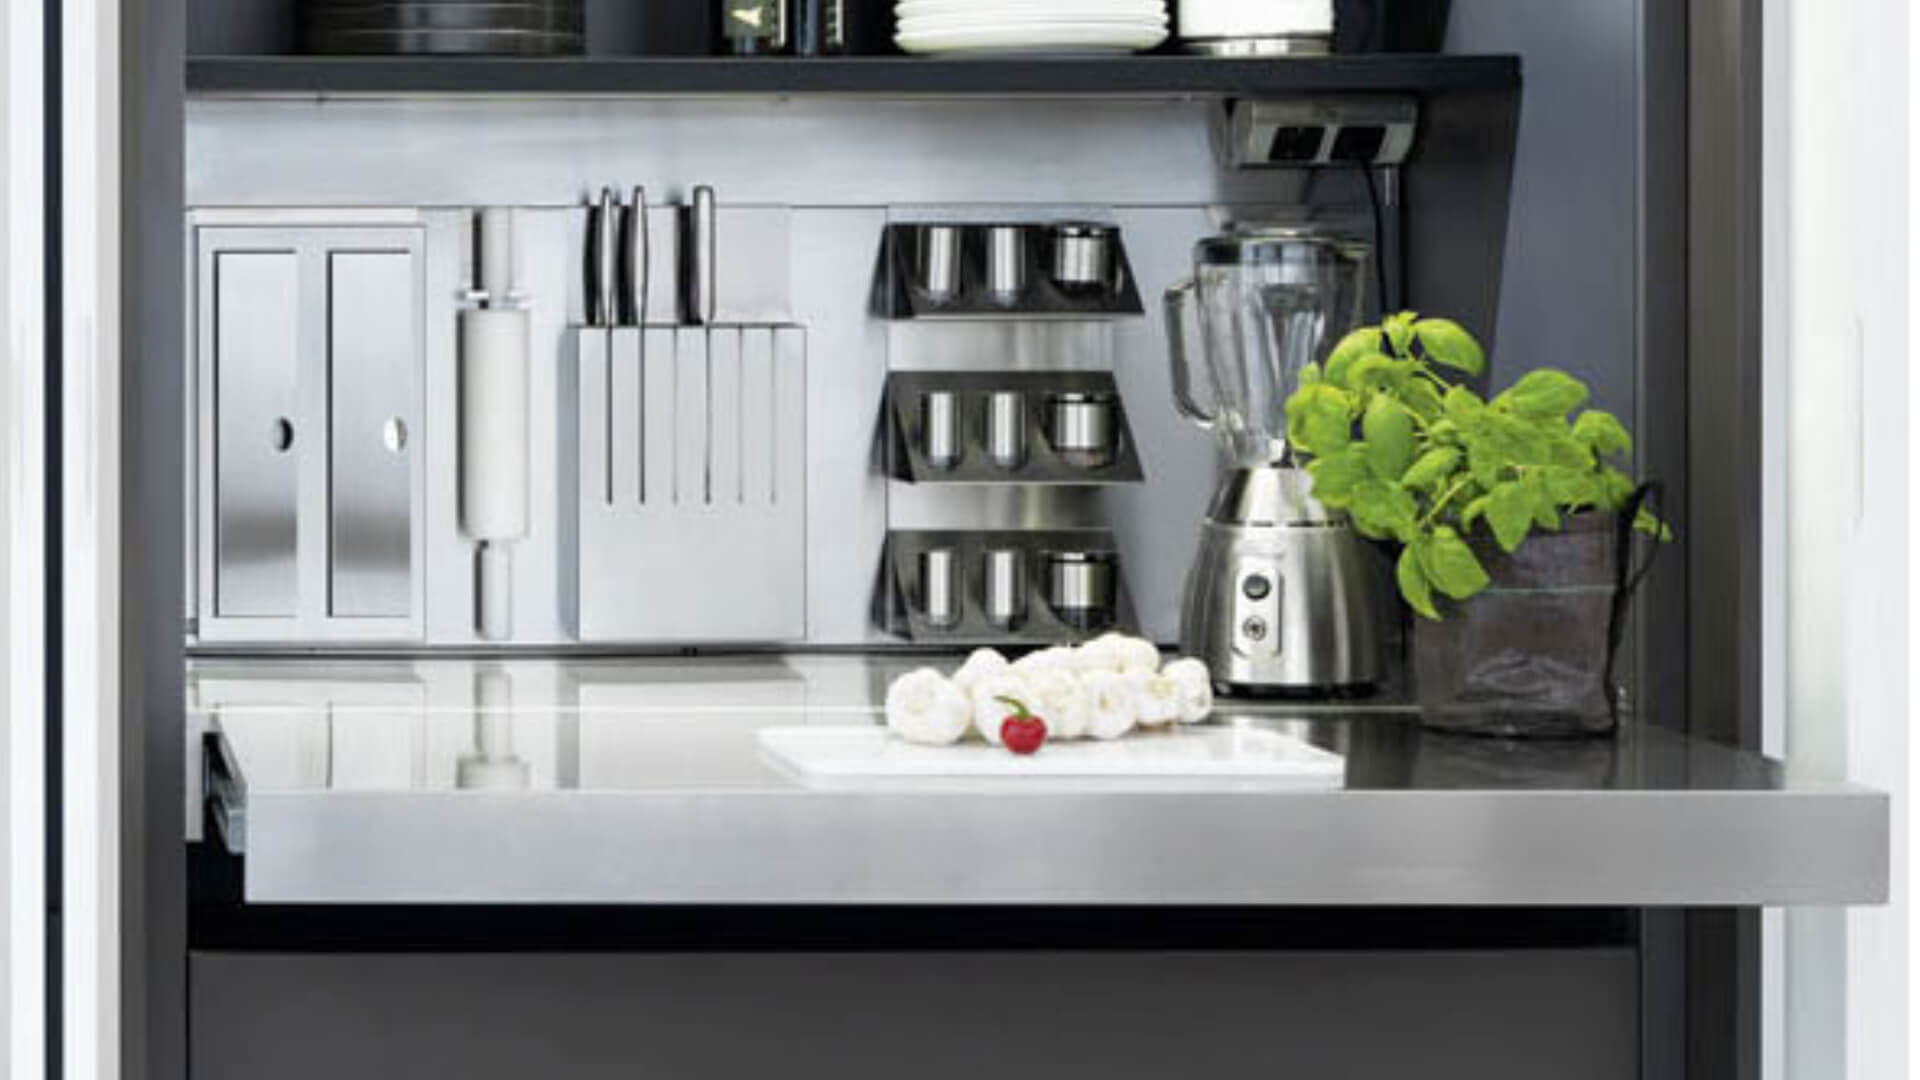 Blog IDW - How to organise and get the most out of your kitchen.